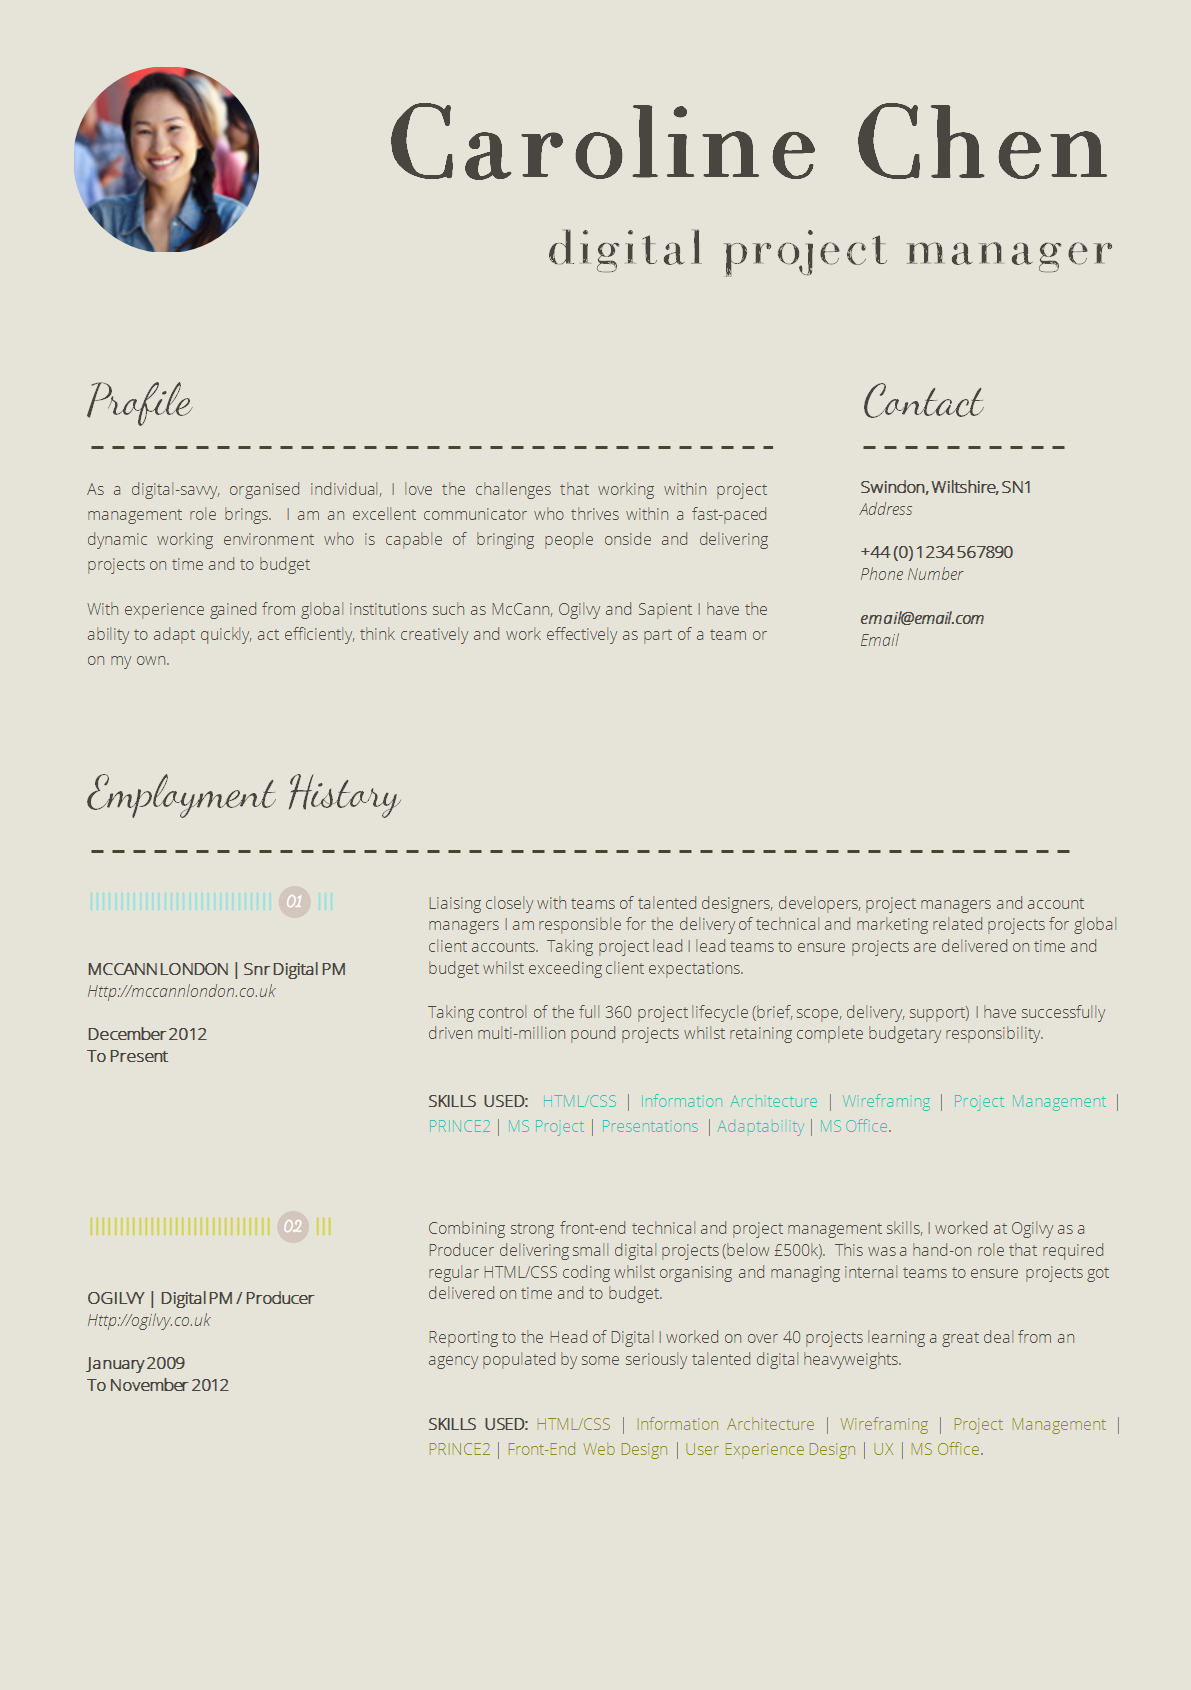 Where can you find a CV Template?